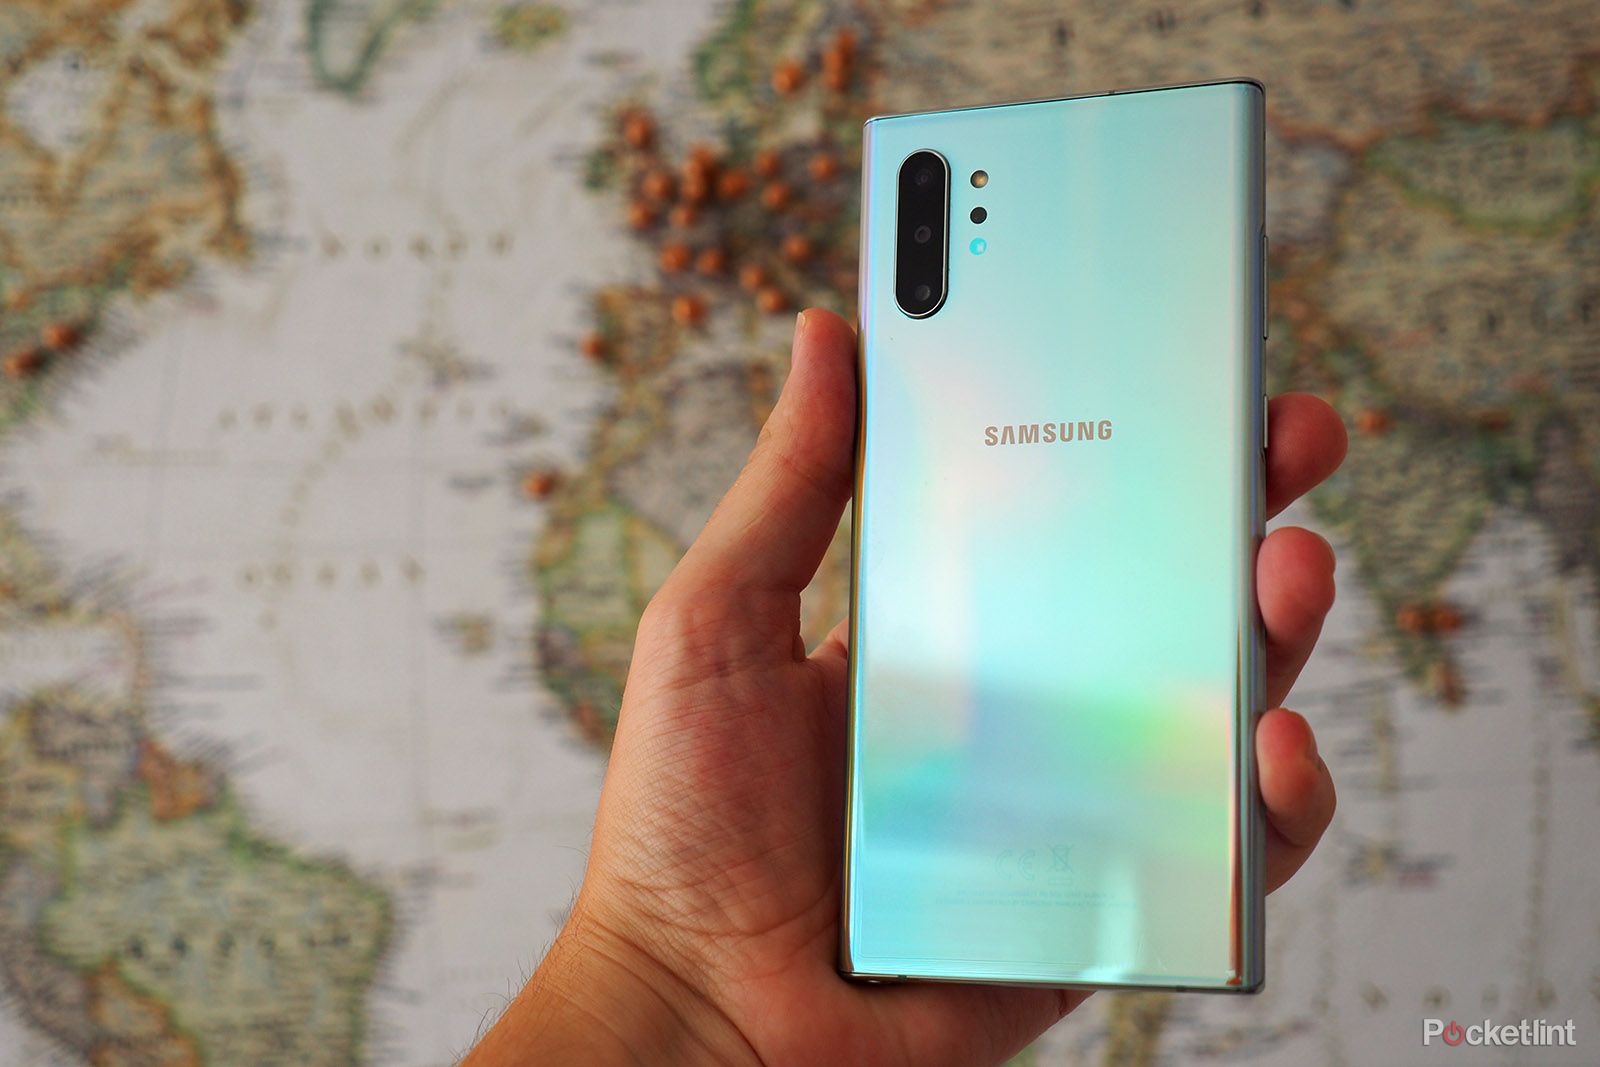 Samsung Galaxy Note 10 Plus review lead image 1